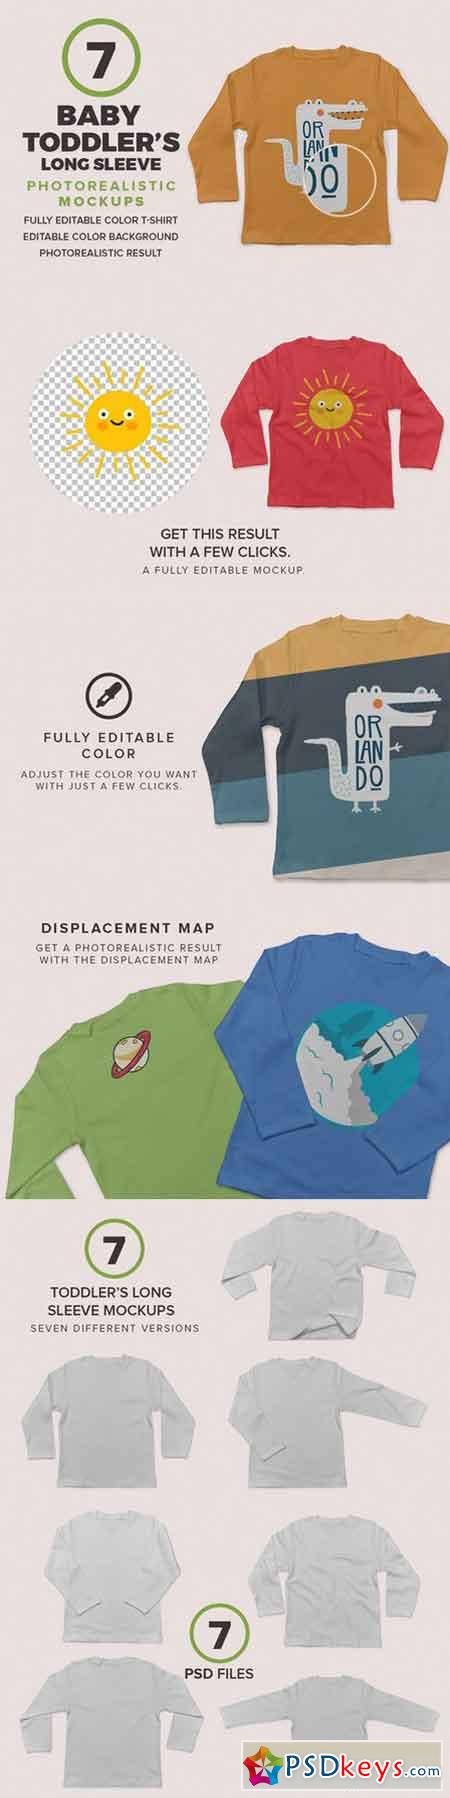 Download Apparel Free Download Photoshop Vector Stock Image Via Torrent Zippyshare From Psdkeys Com Page 2 Chan 60353361 Rssing Com PSD Mockup Templates